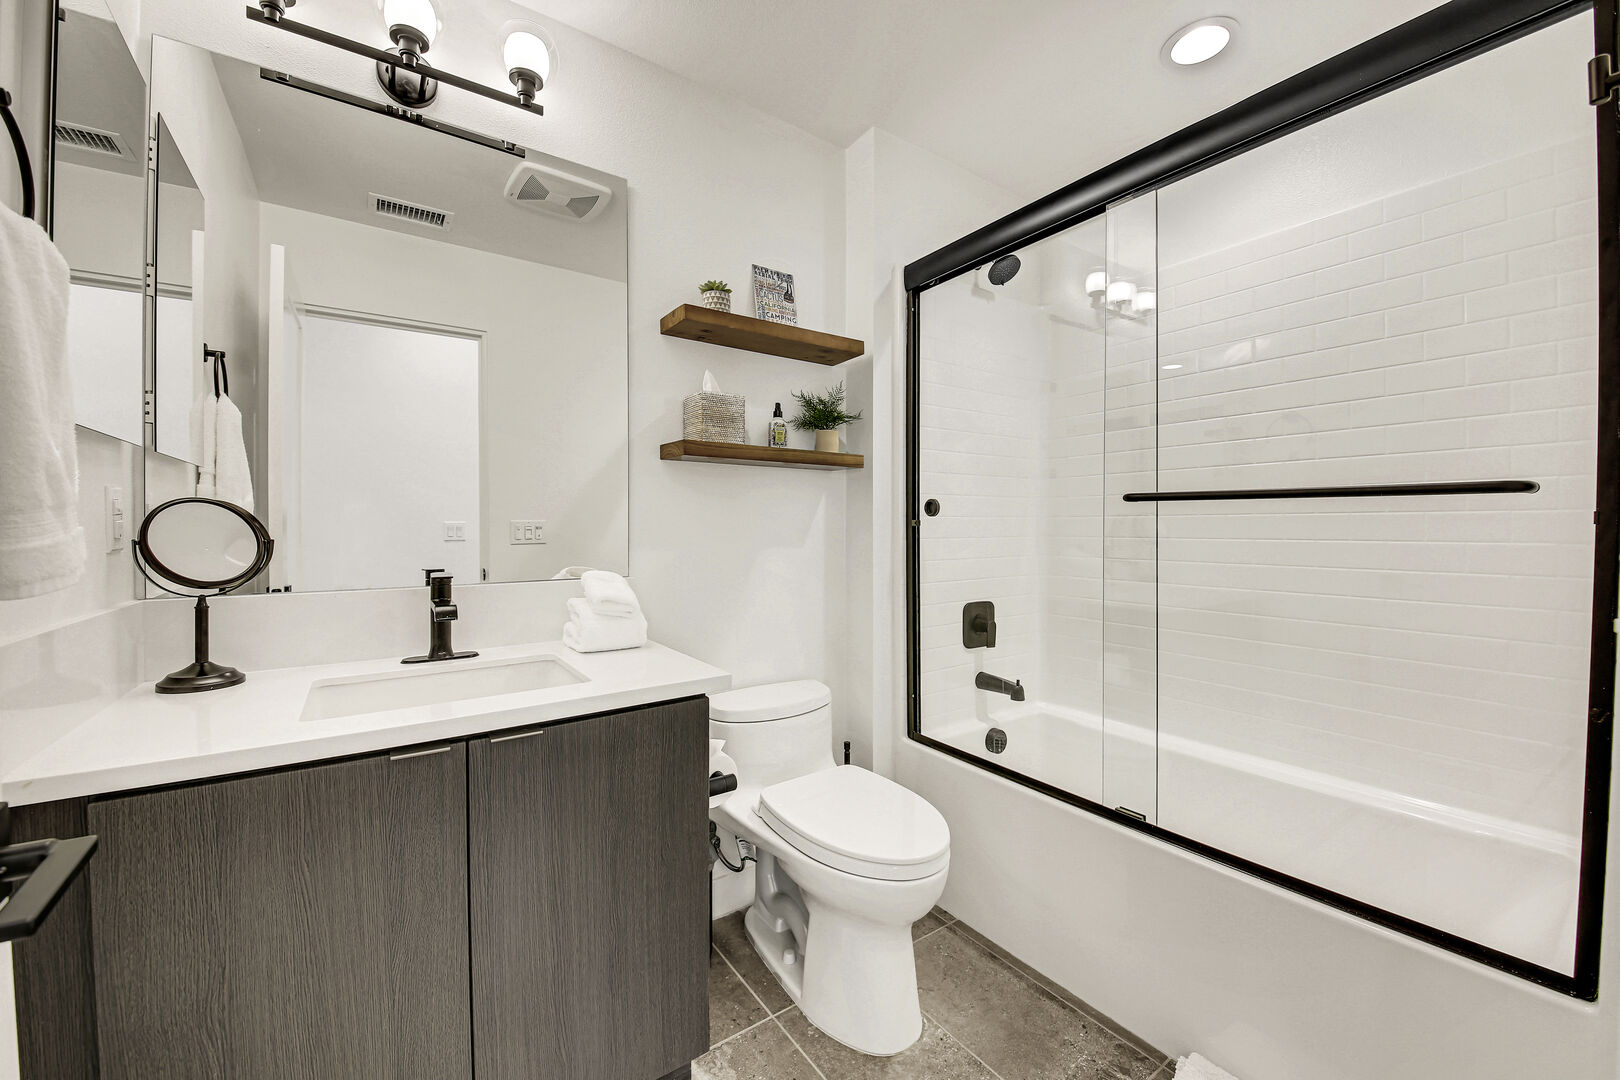 The hallway bathroom is located next to the laundry room and features a shower, bathtub combo and a vanity sink.